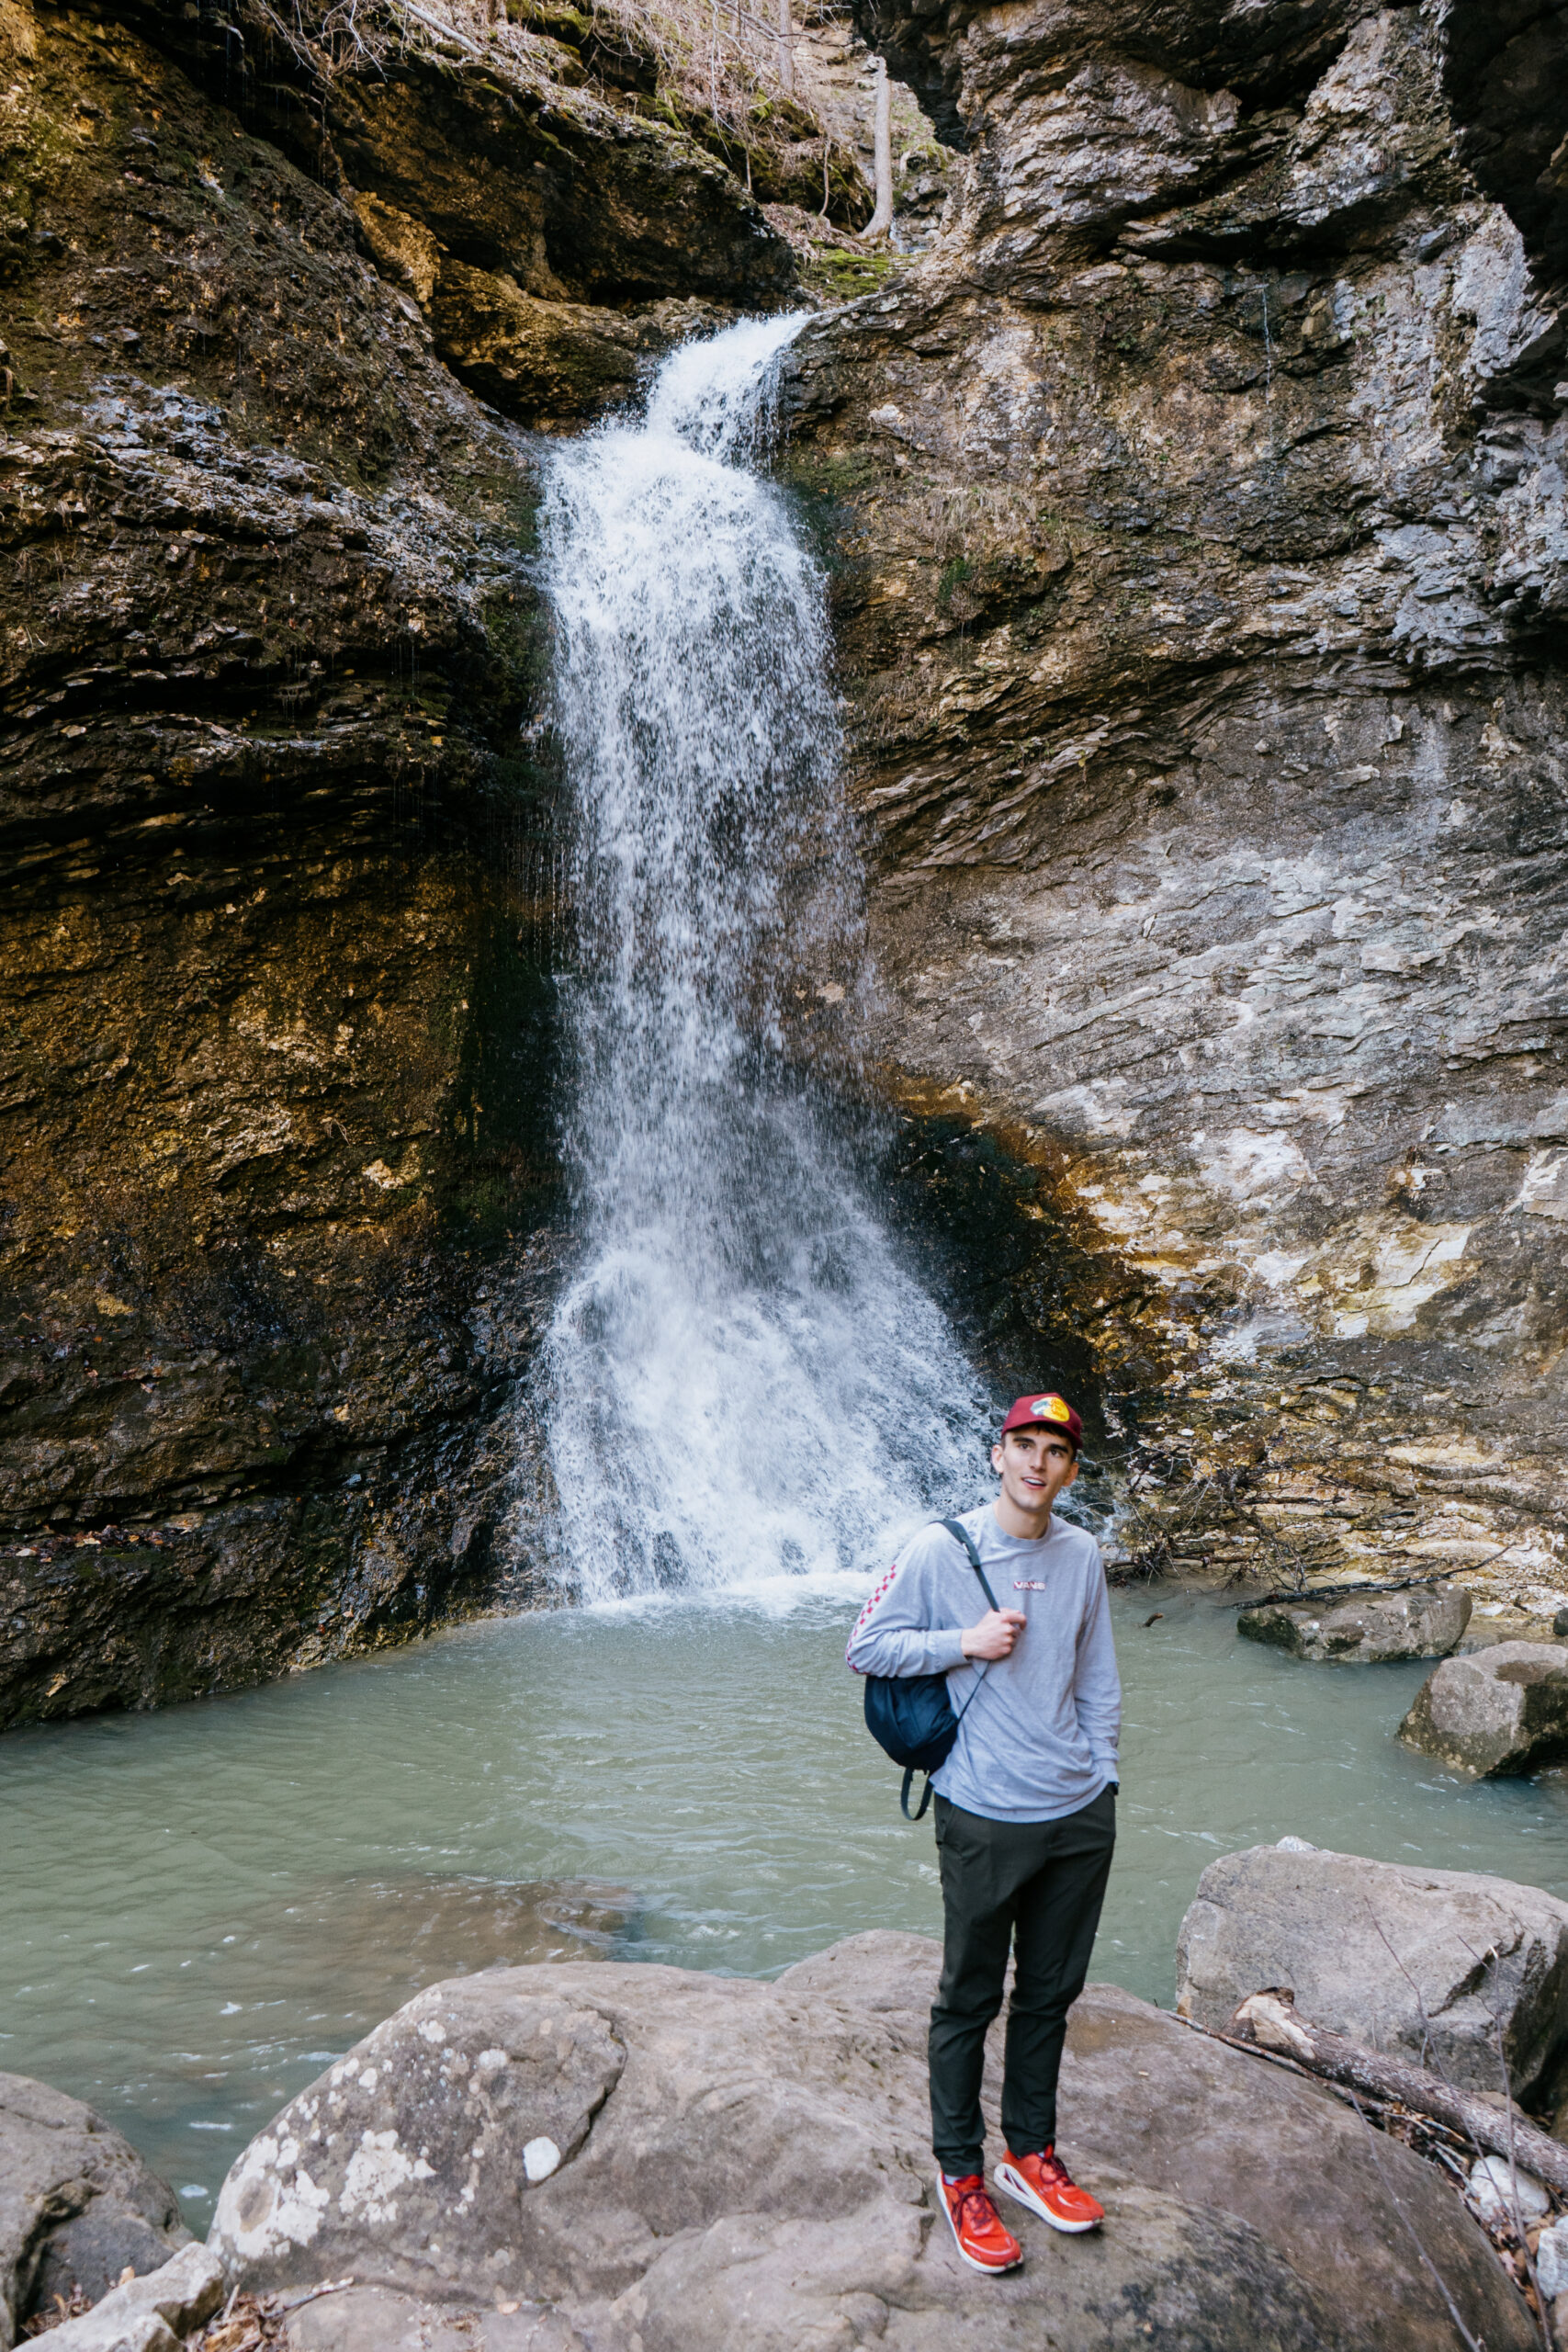 Luke Johnson by Waterfall at Lost Valley River Hike in Arkansas